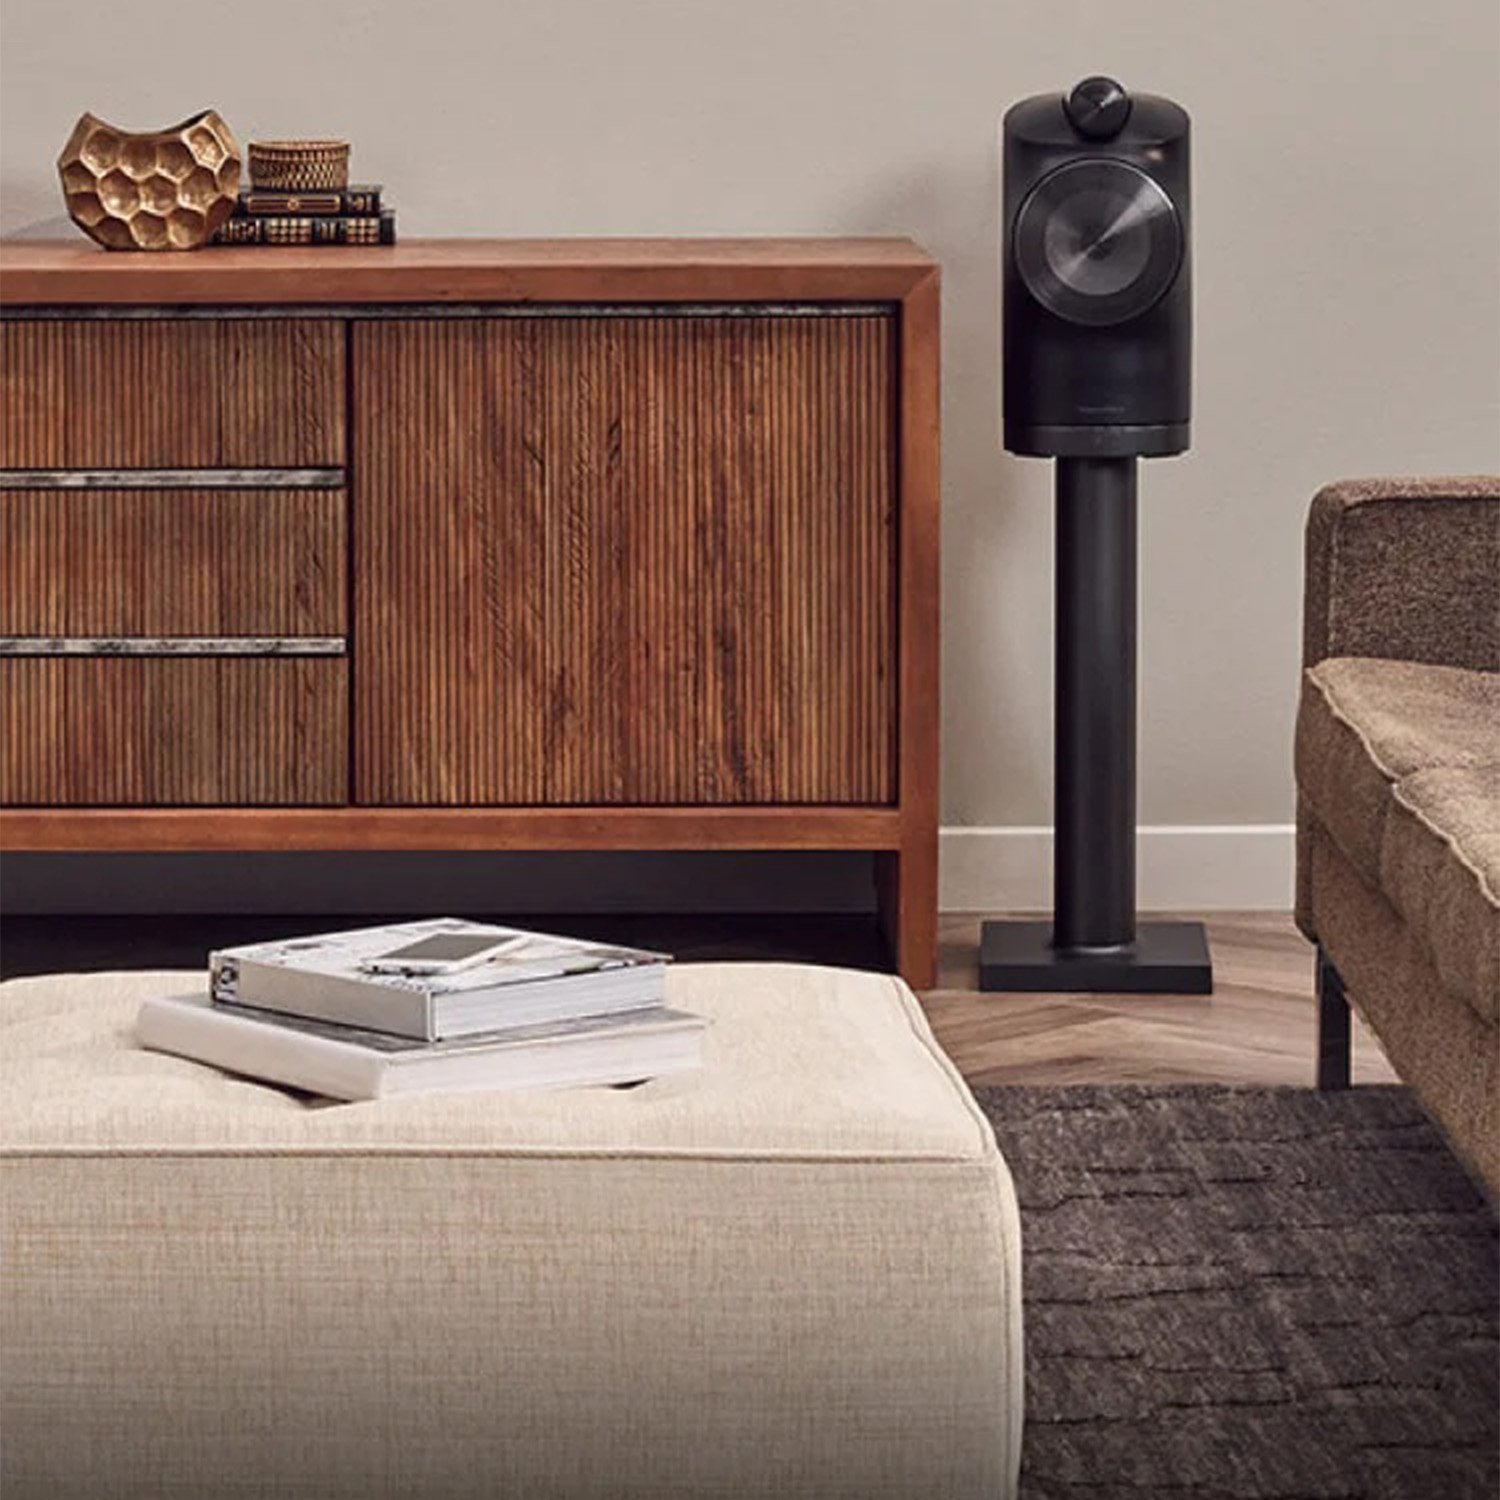 Formation Duo - Bowers & Wilkins sound, no need for wires